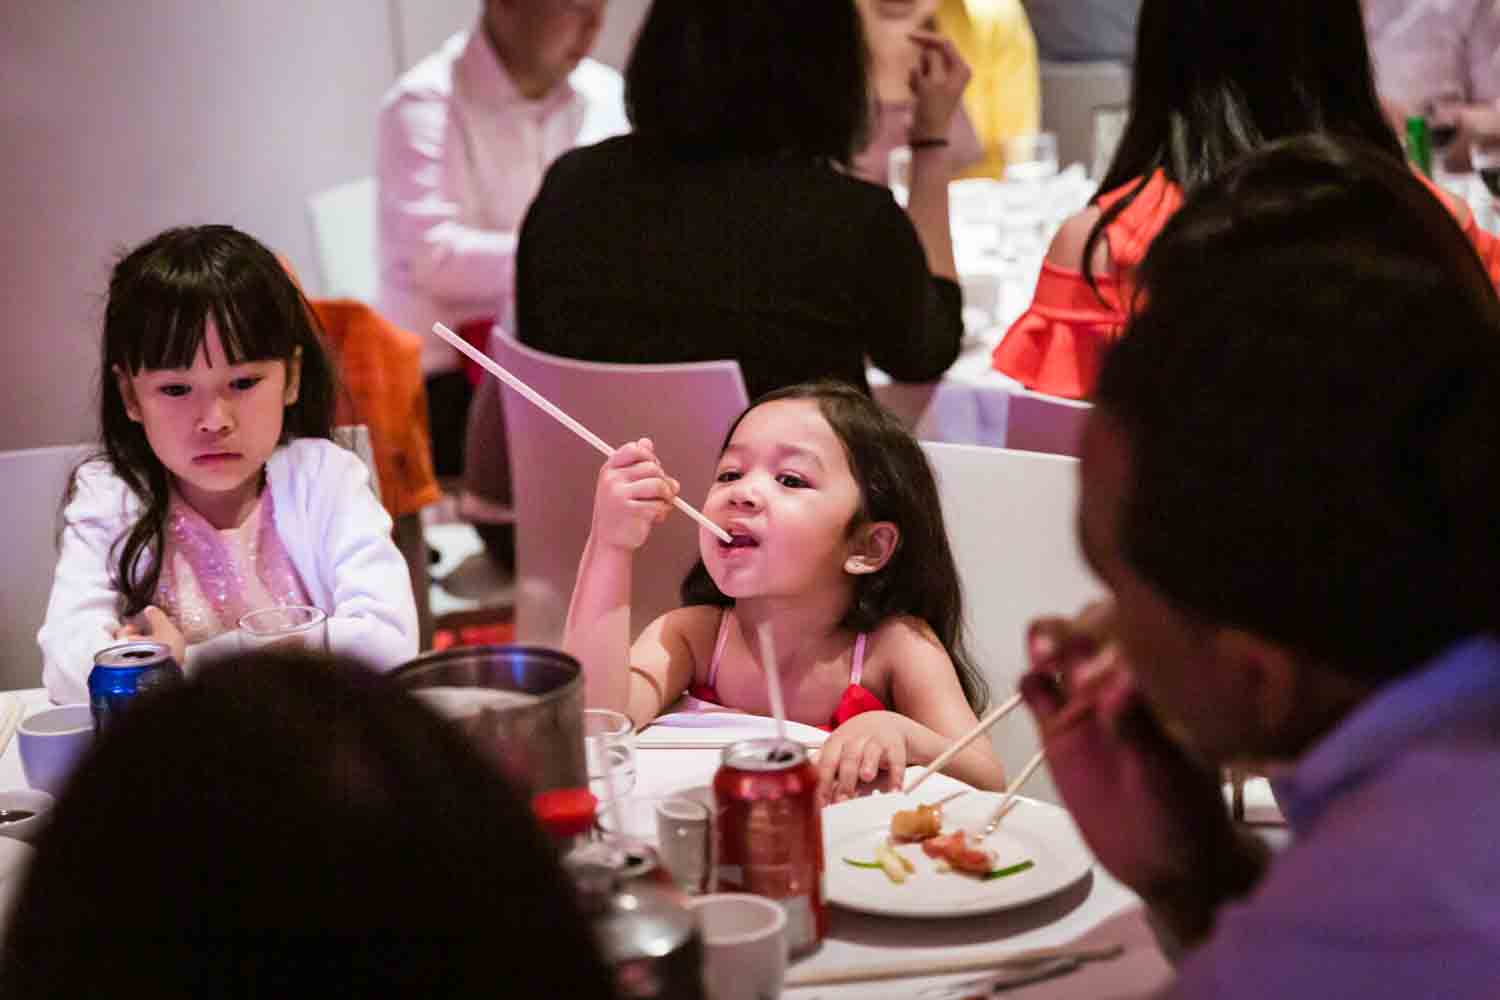 Little girl eating with chopsticks at a Chinatown rehearsal dinner